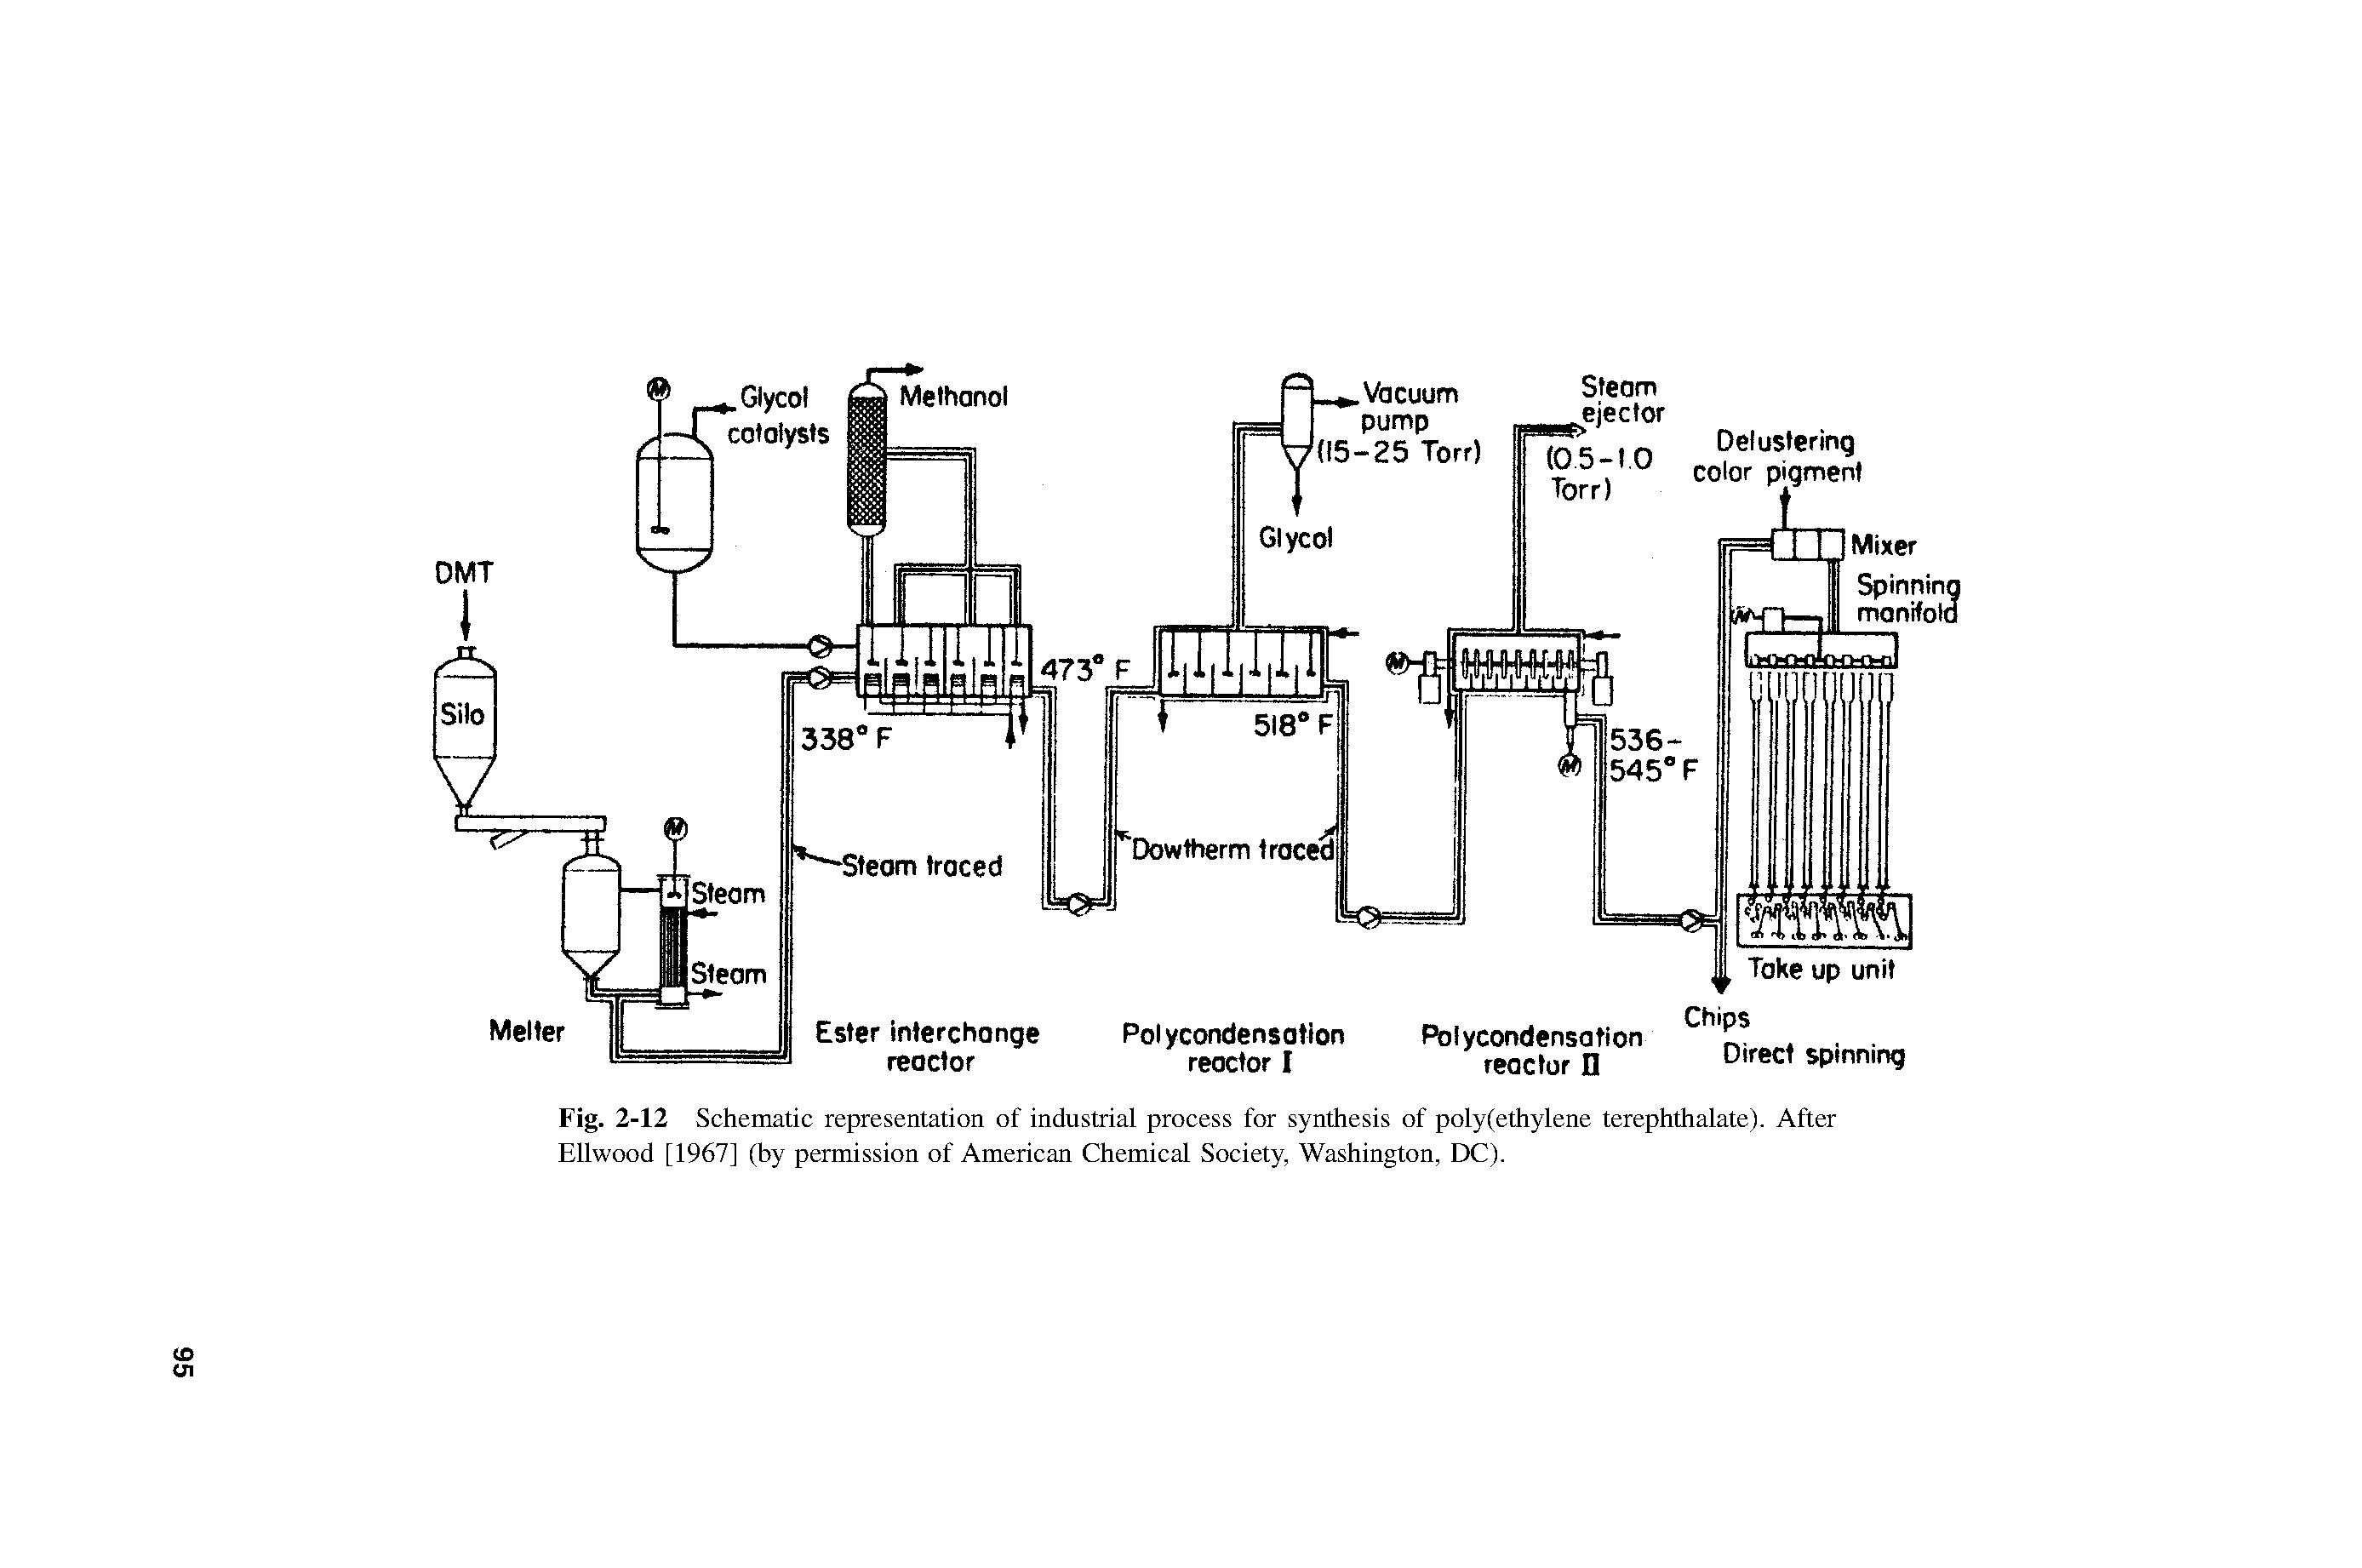 Fig. 2-12 Schematic representation of industrial process for synthesis of poly(ethylene terephthalate). After Ellwood [1967] (by permission of American Chemical Society, Washington, DC).